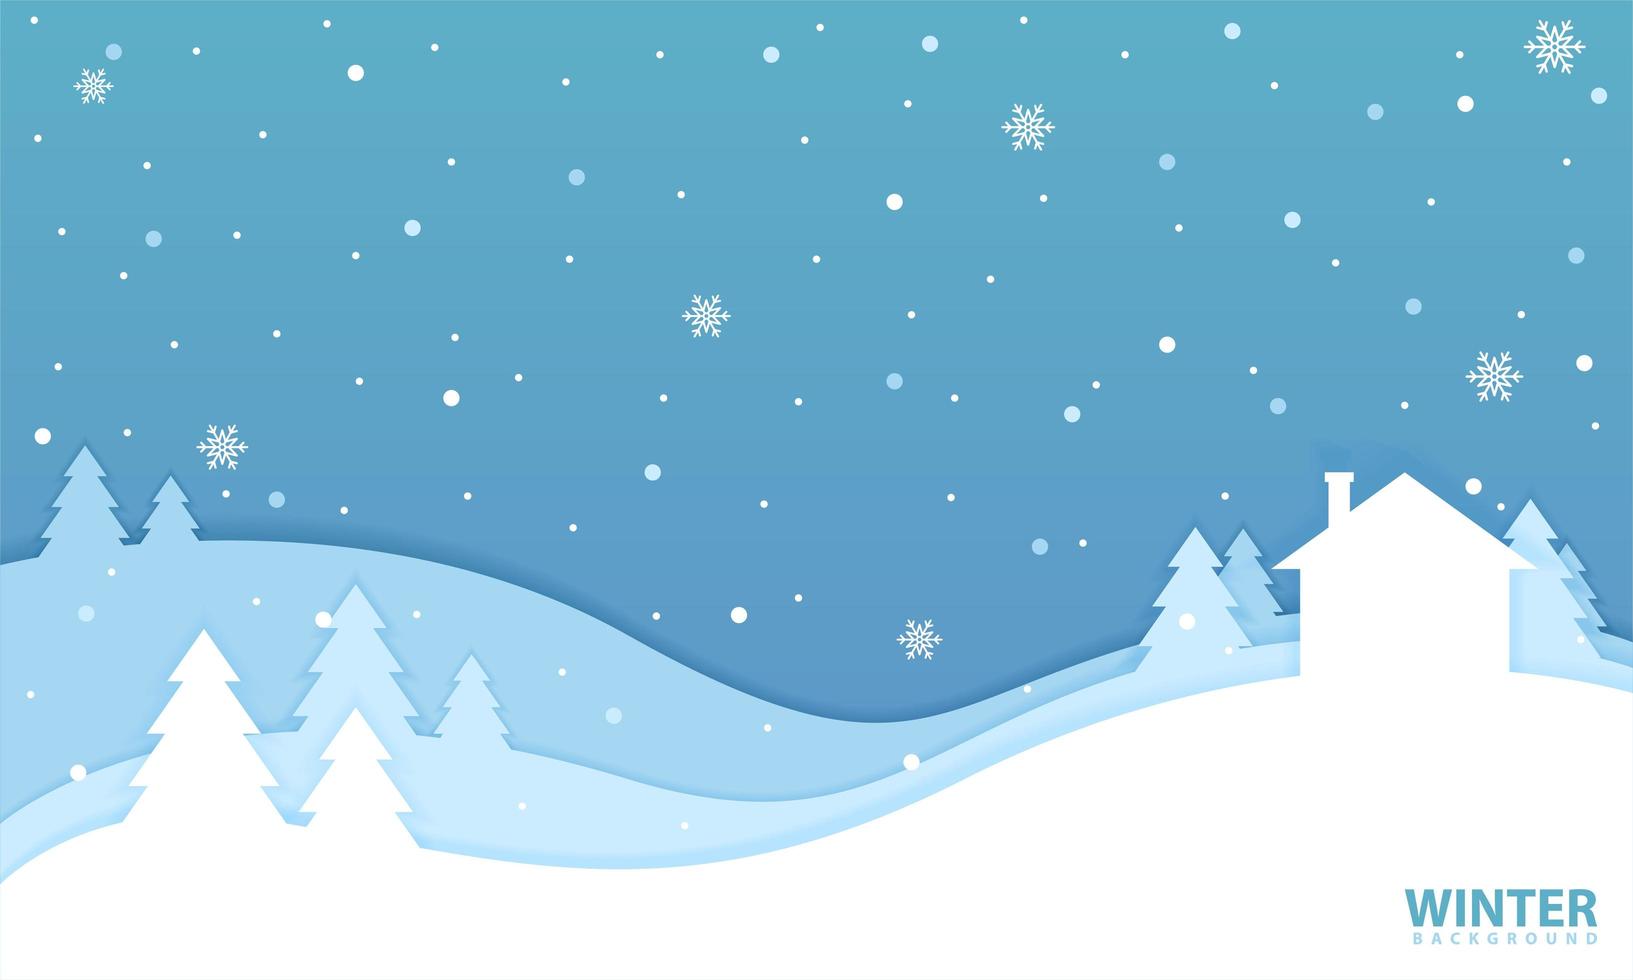 Winter Landscape with Home in Paper Cut Style vector